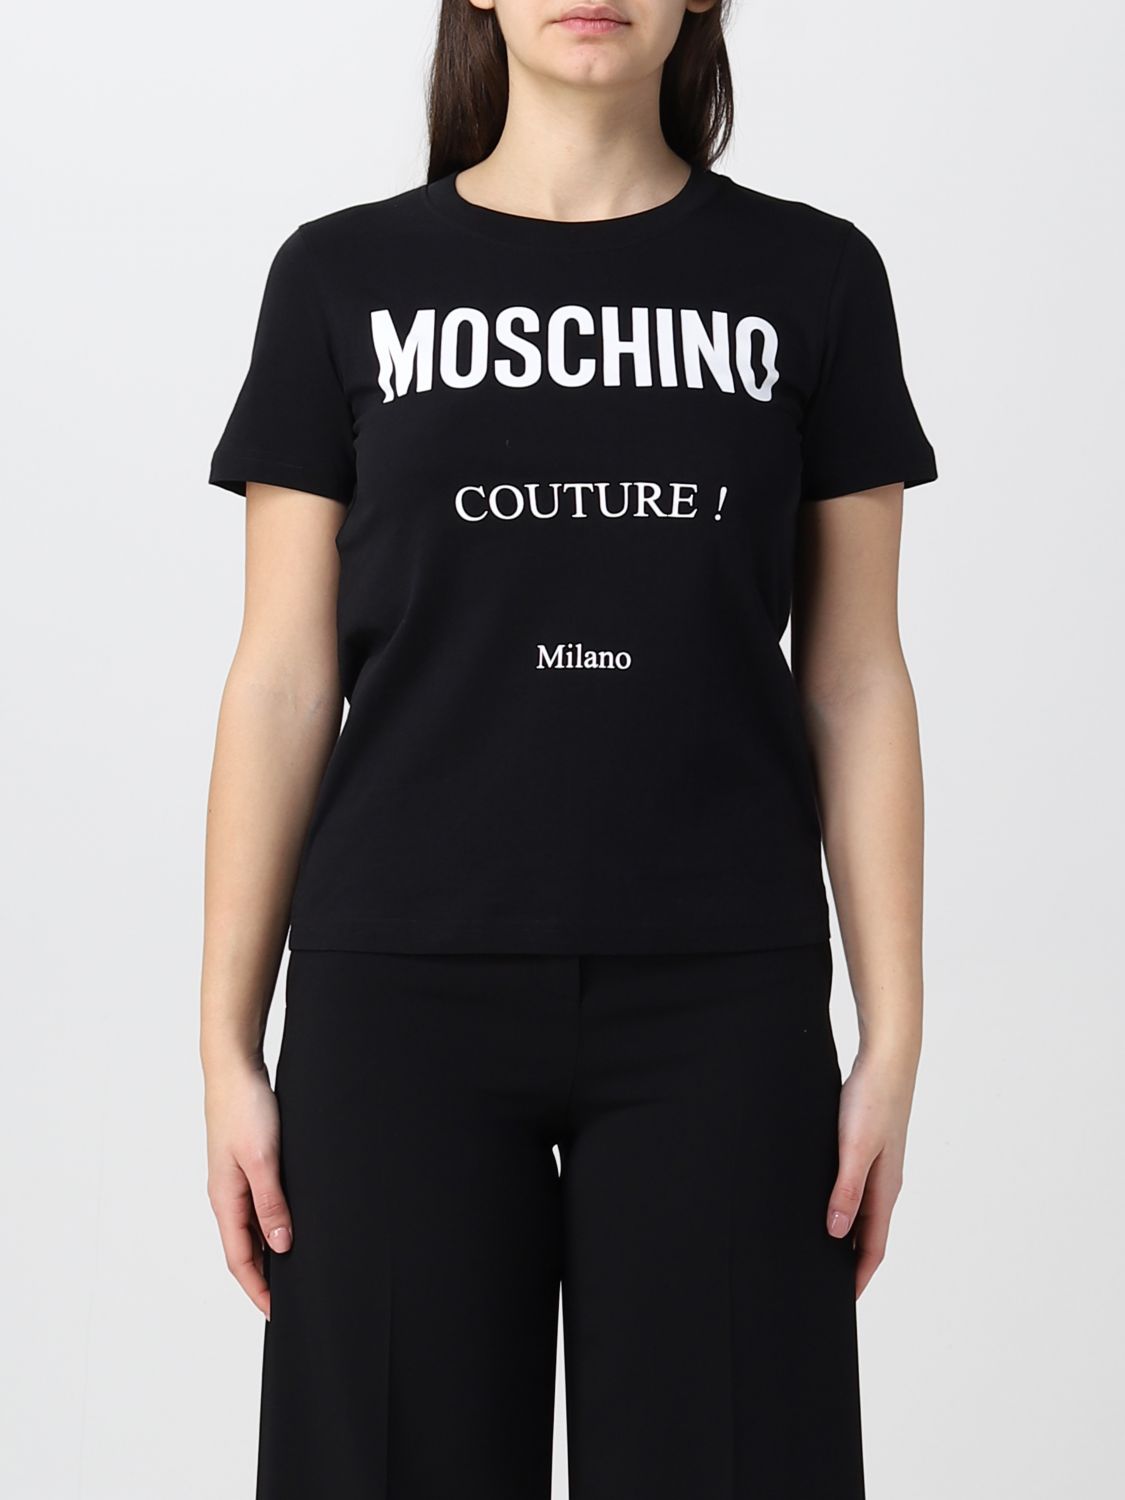 MOSCHINO COUTURE: t-shirt for woman - Black | Moschino Couture t-shirt ...